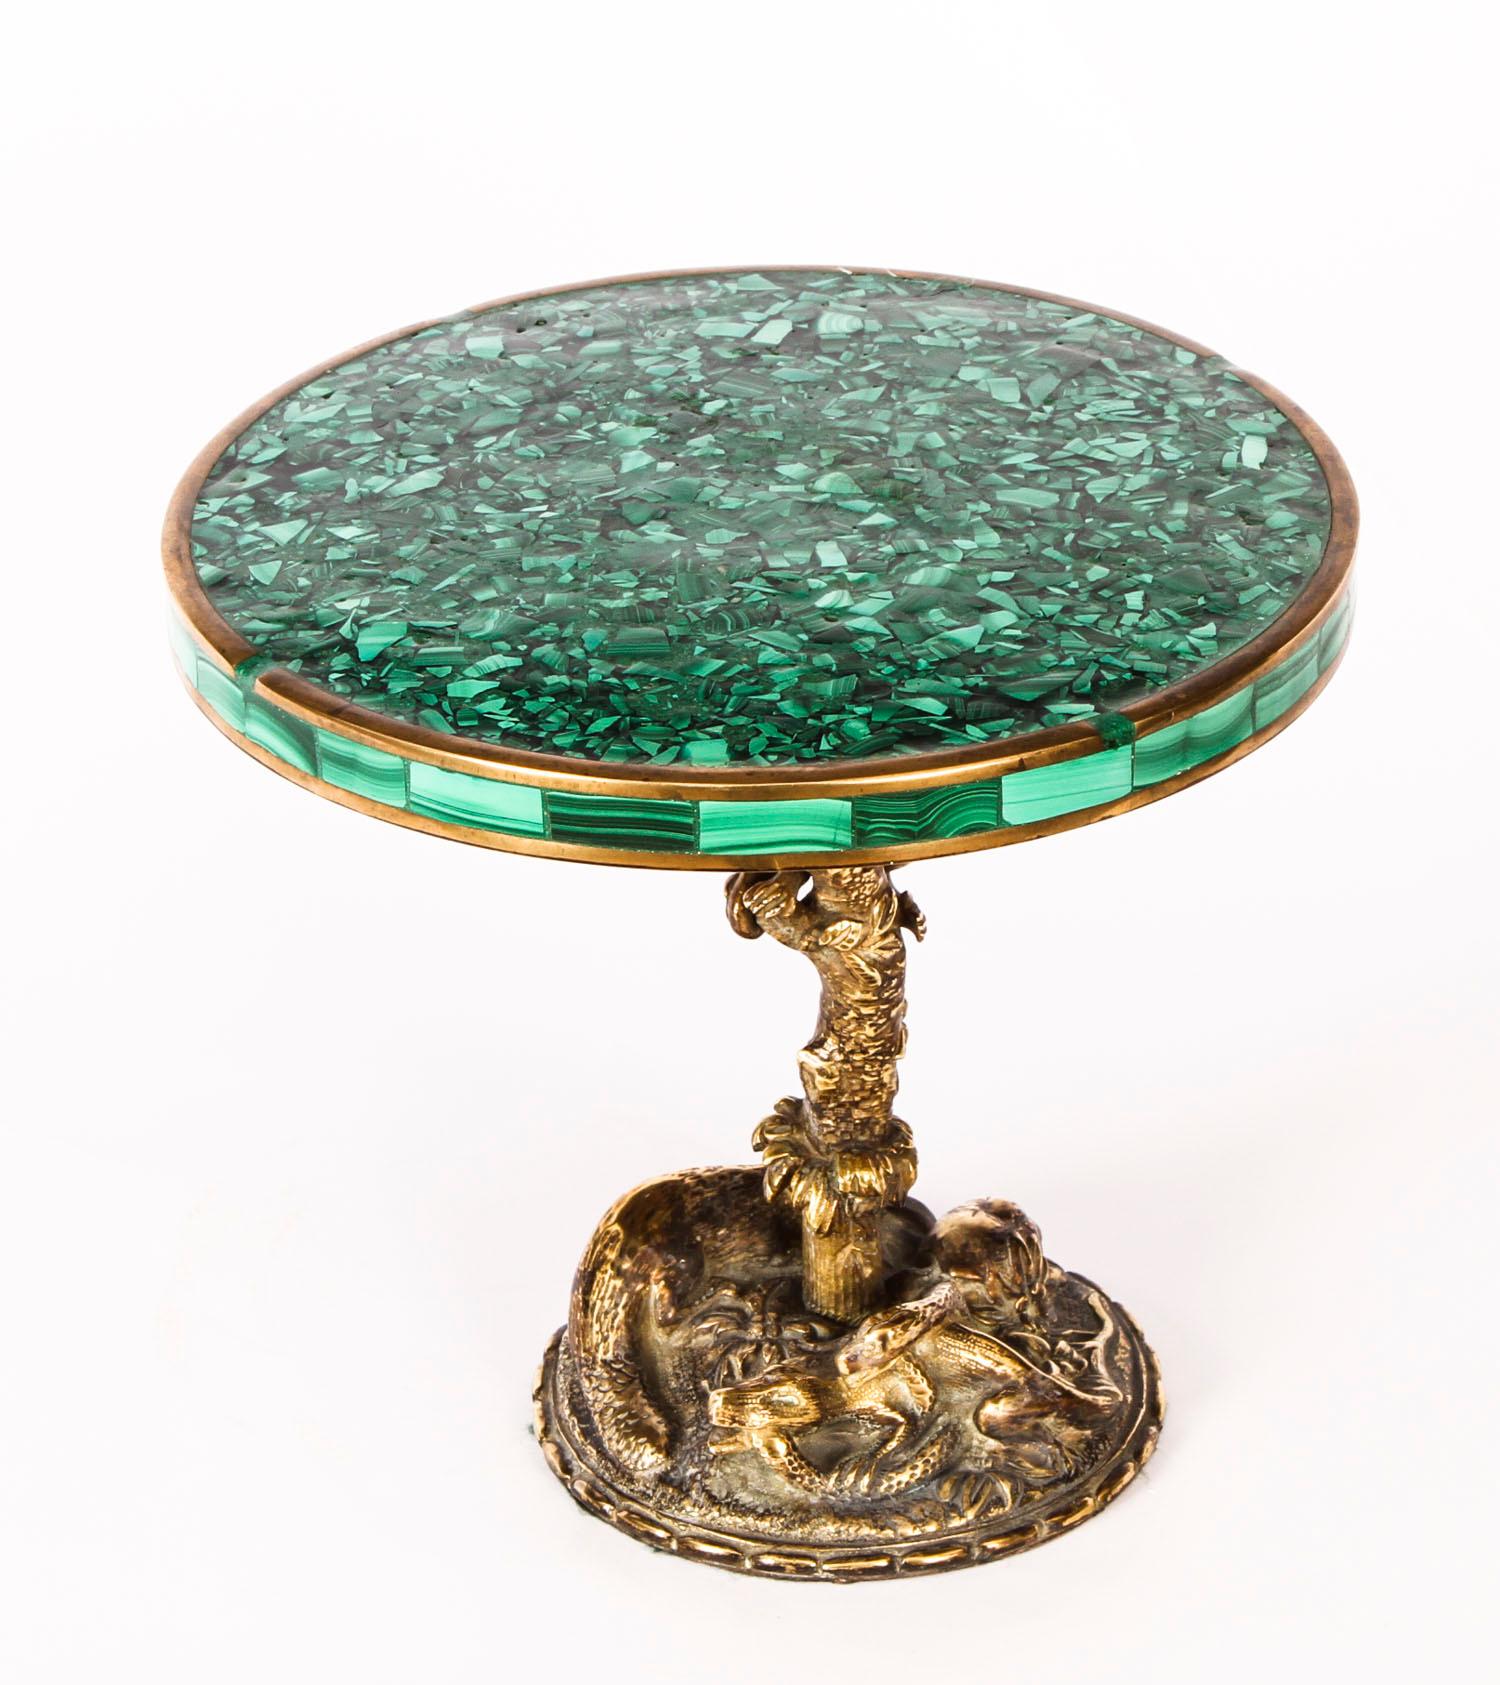 Antique French Ormolu and Malachite Miniature Table, 19th Century 10